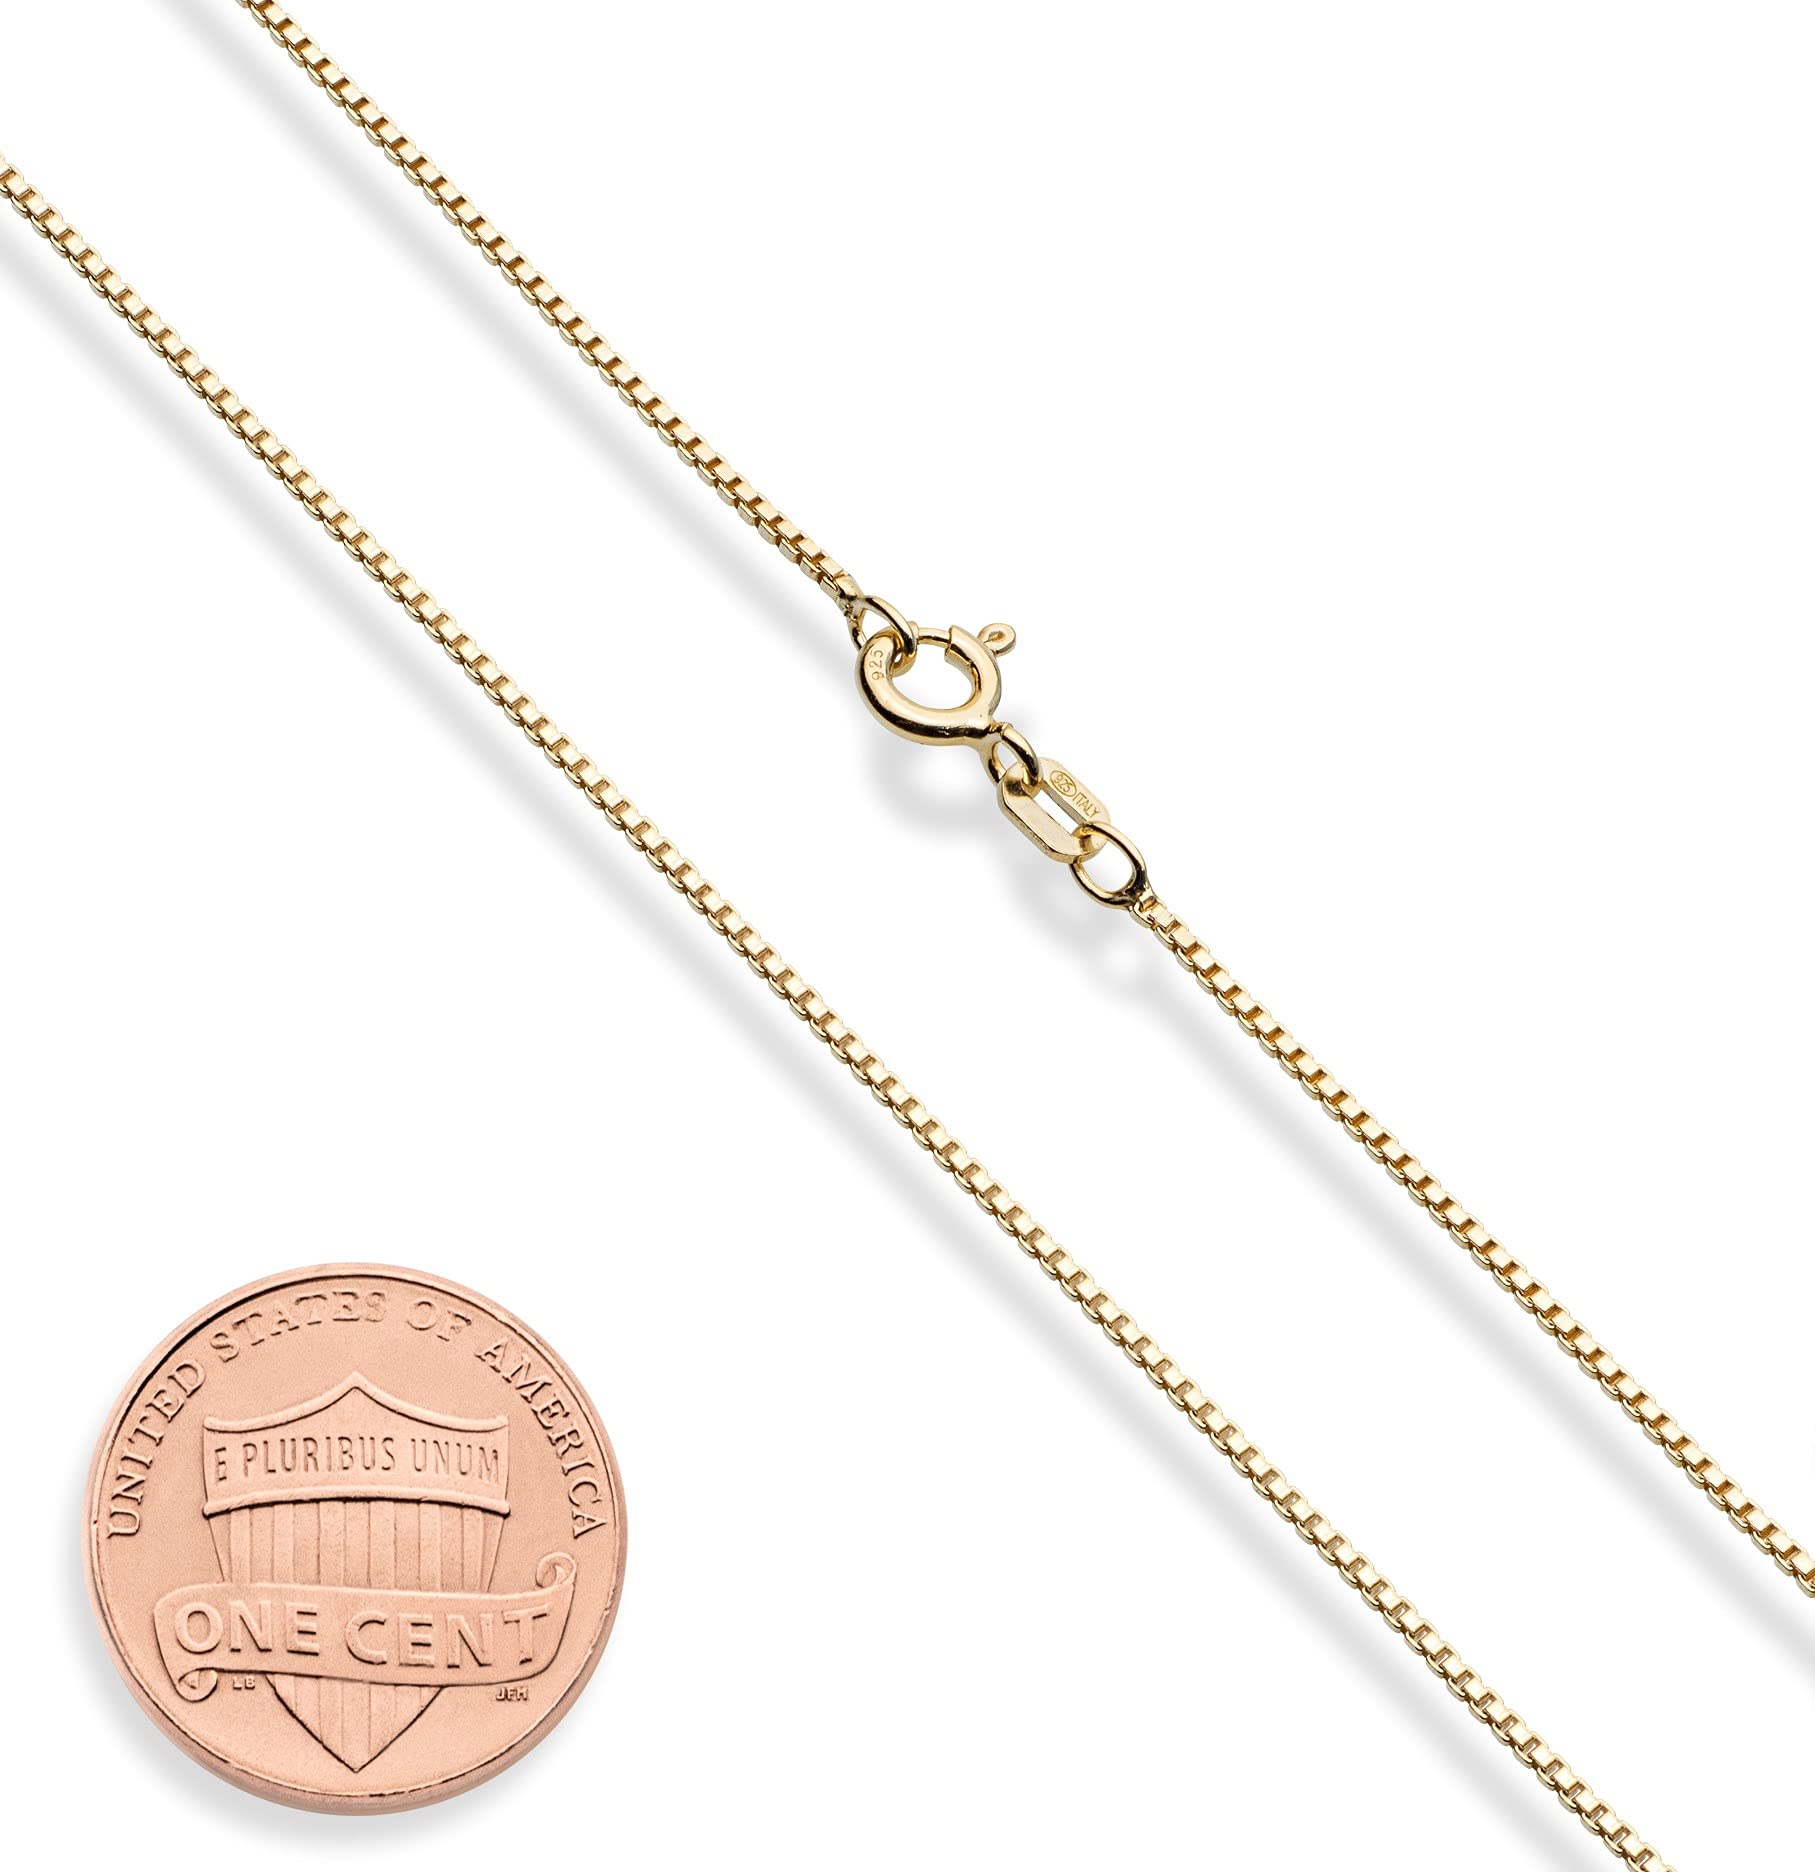 Miabella Solid 18K Gold Over 925 Sterling Silver Italian 1mm Box Chain Necklace for Women Men, Made in Italy